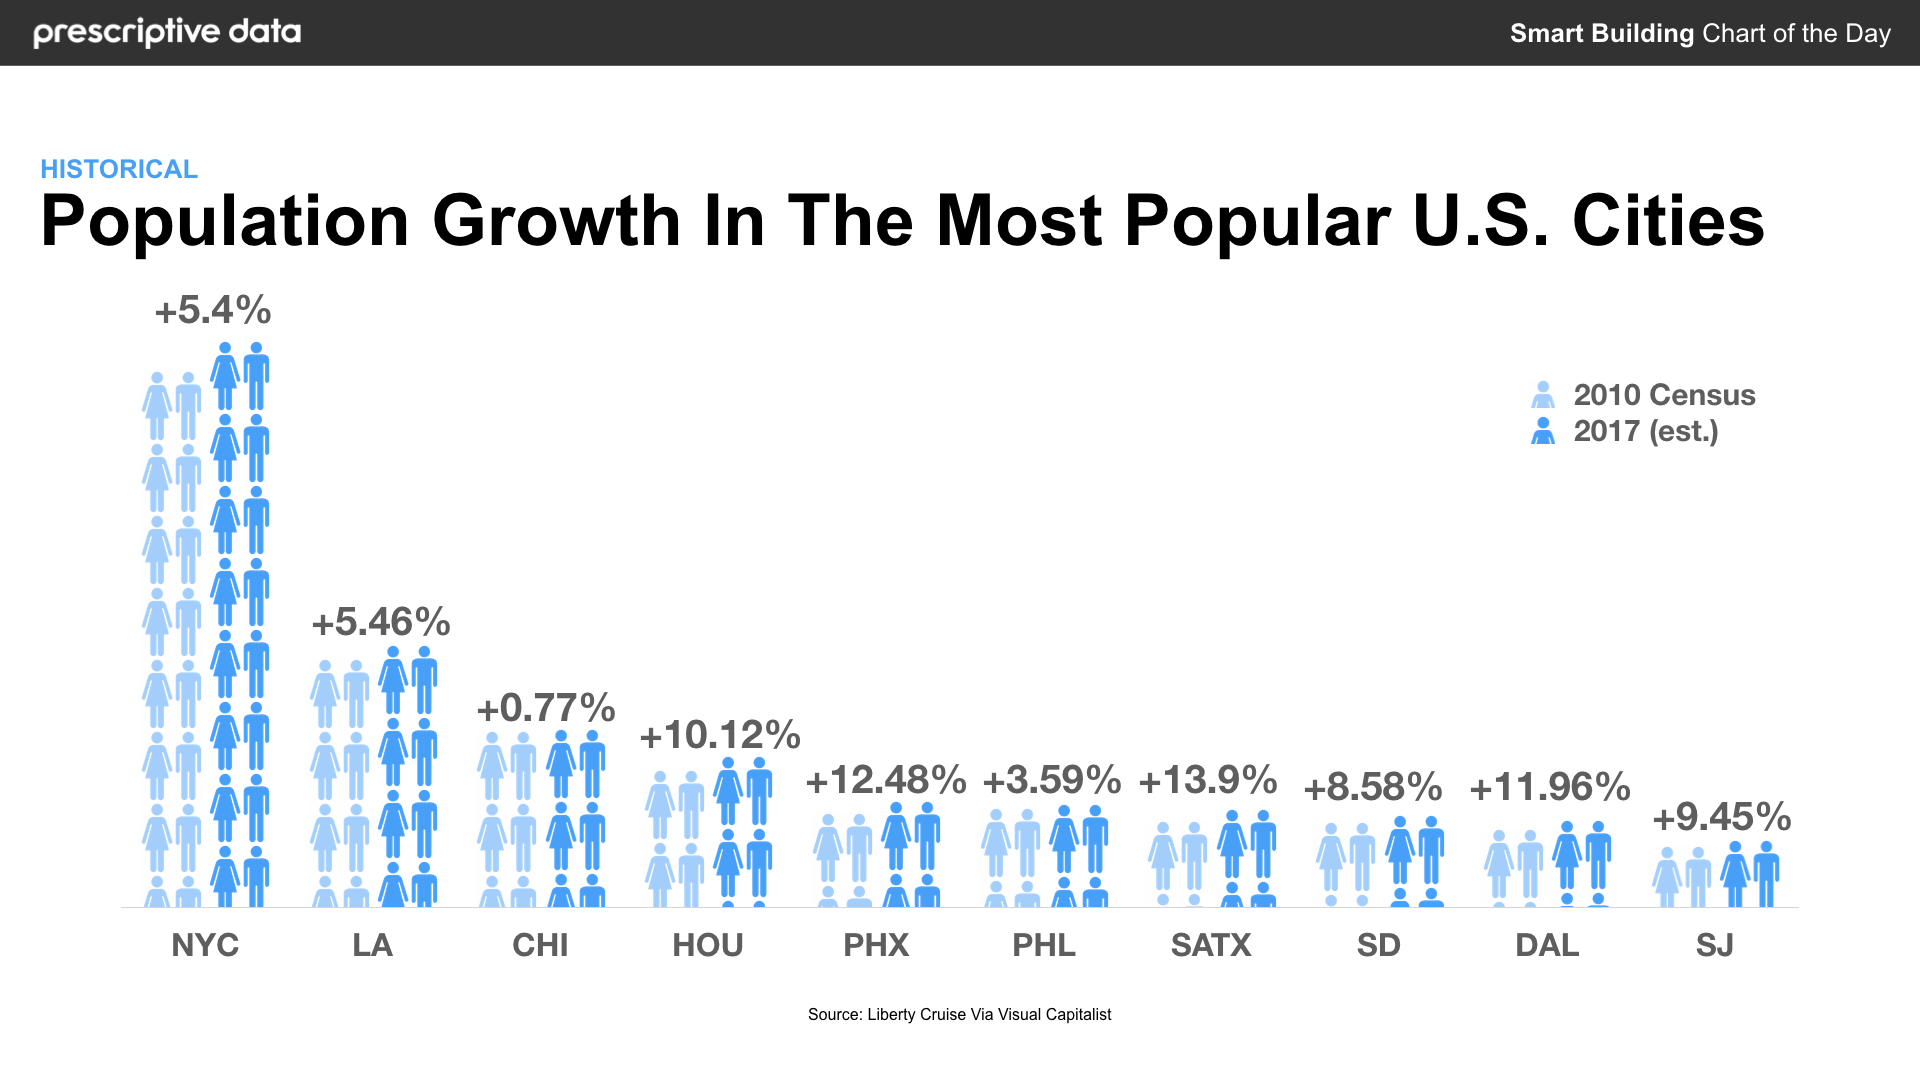 Population Growth in the Most Popular U.S. Cities — Prescriptive Data